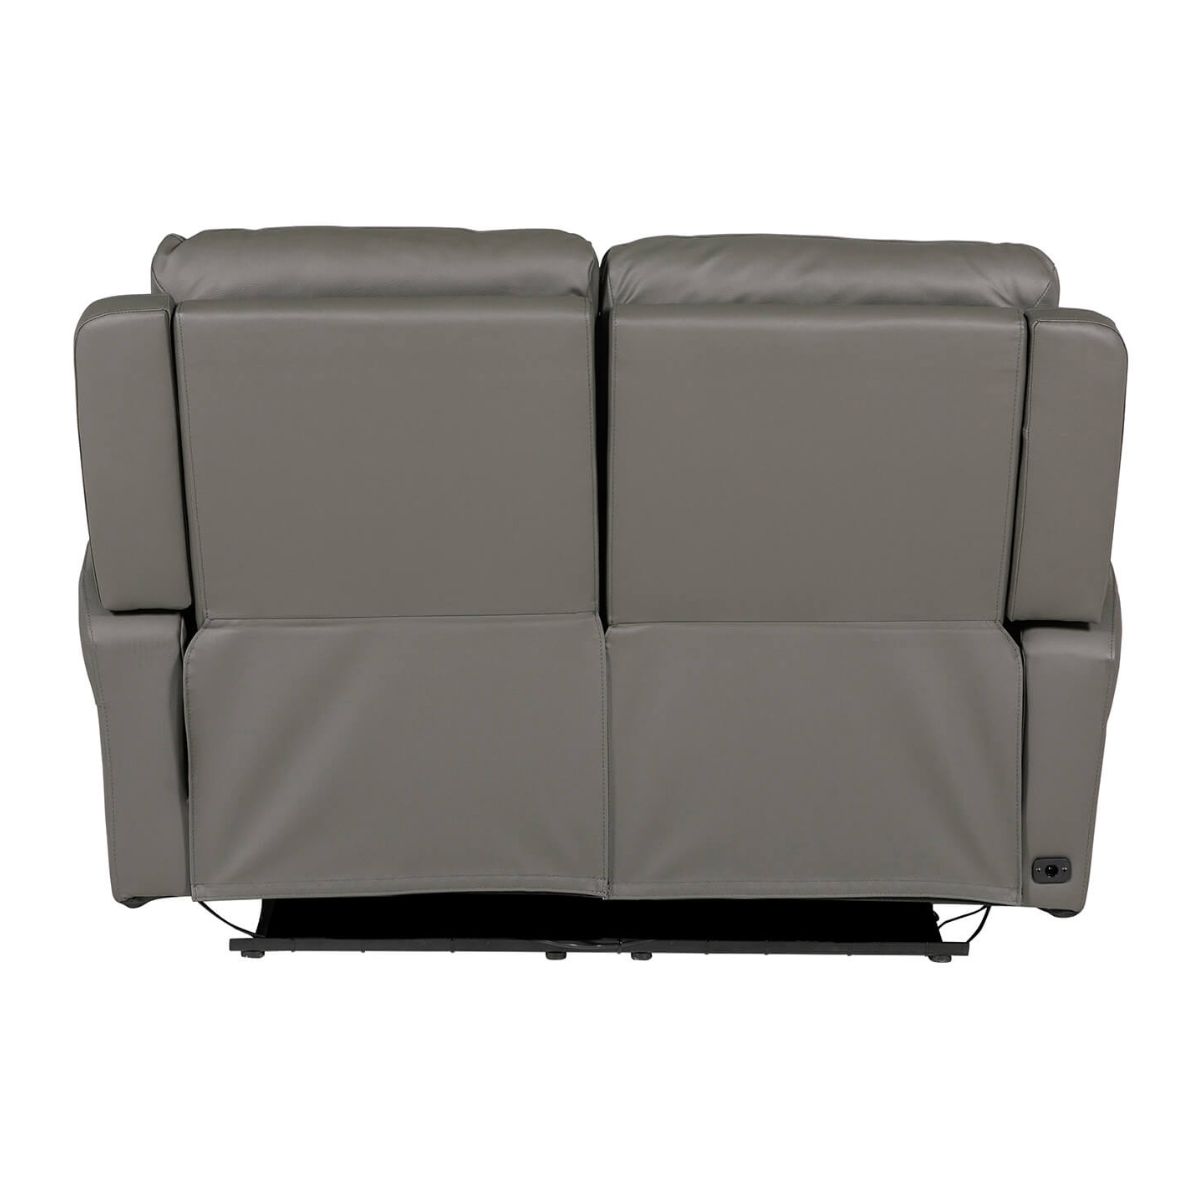 Rosslare Leather 2 Seater Electric Recliner Grey - 4